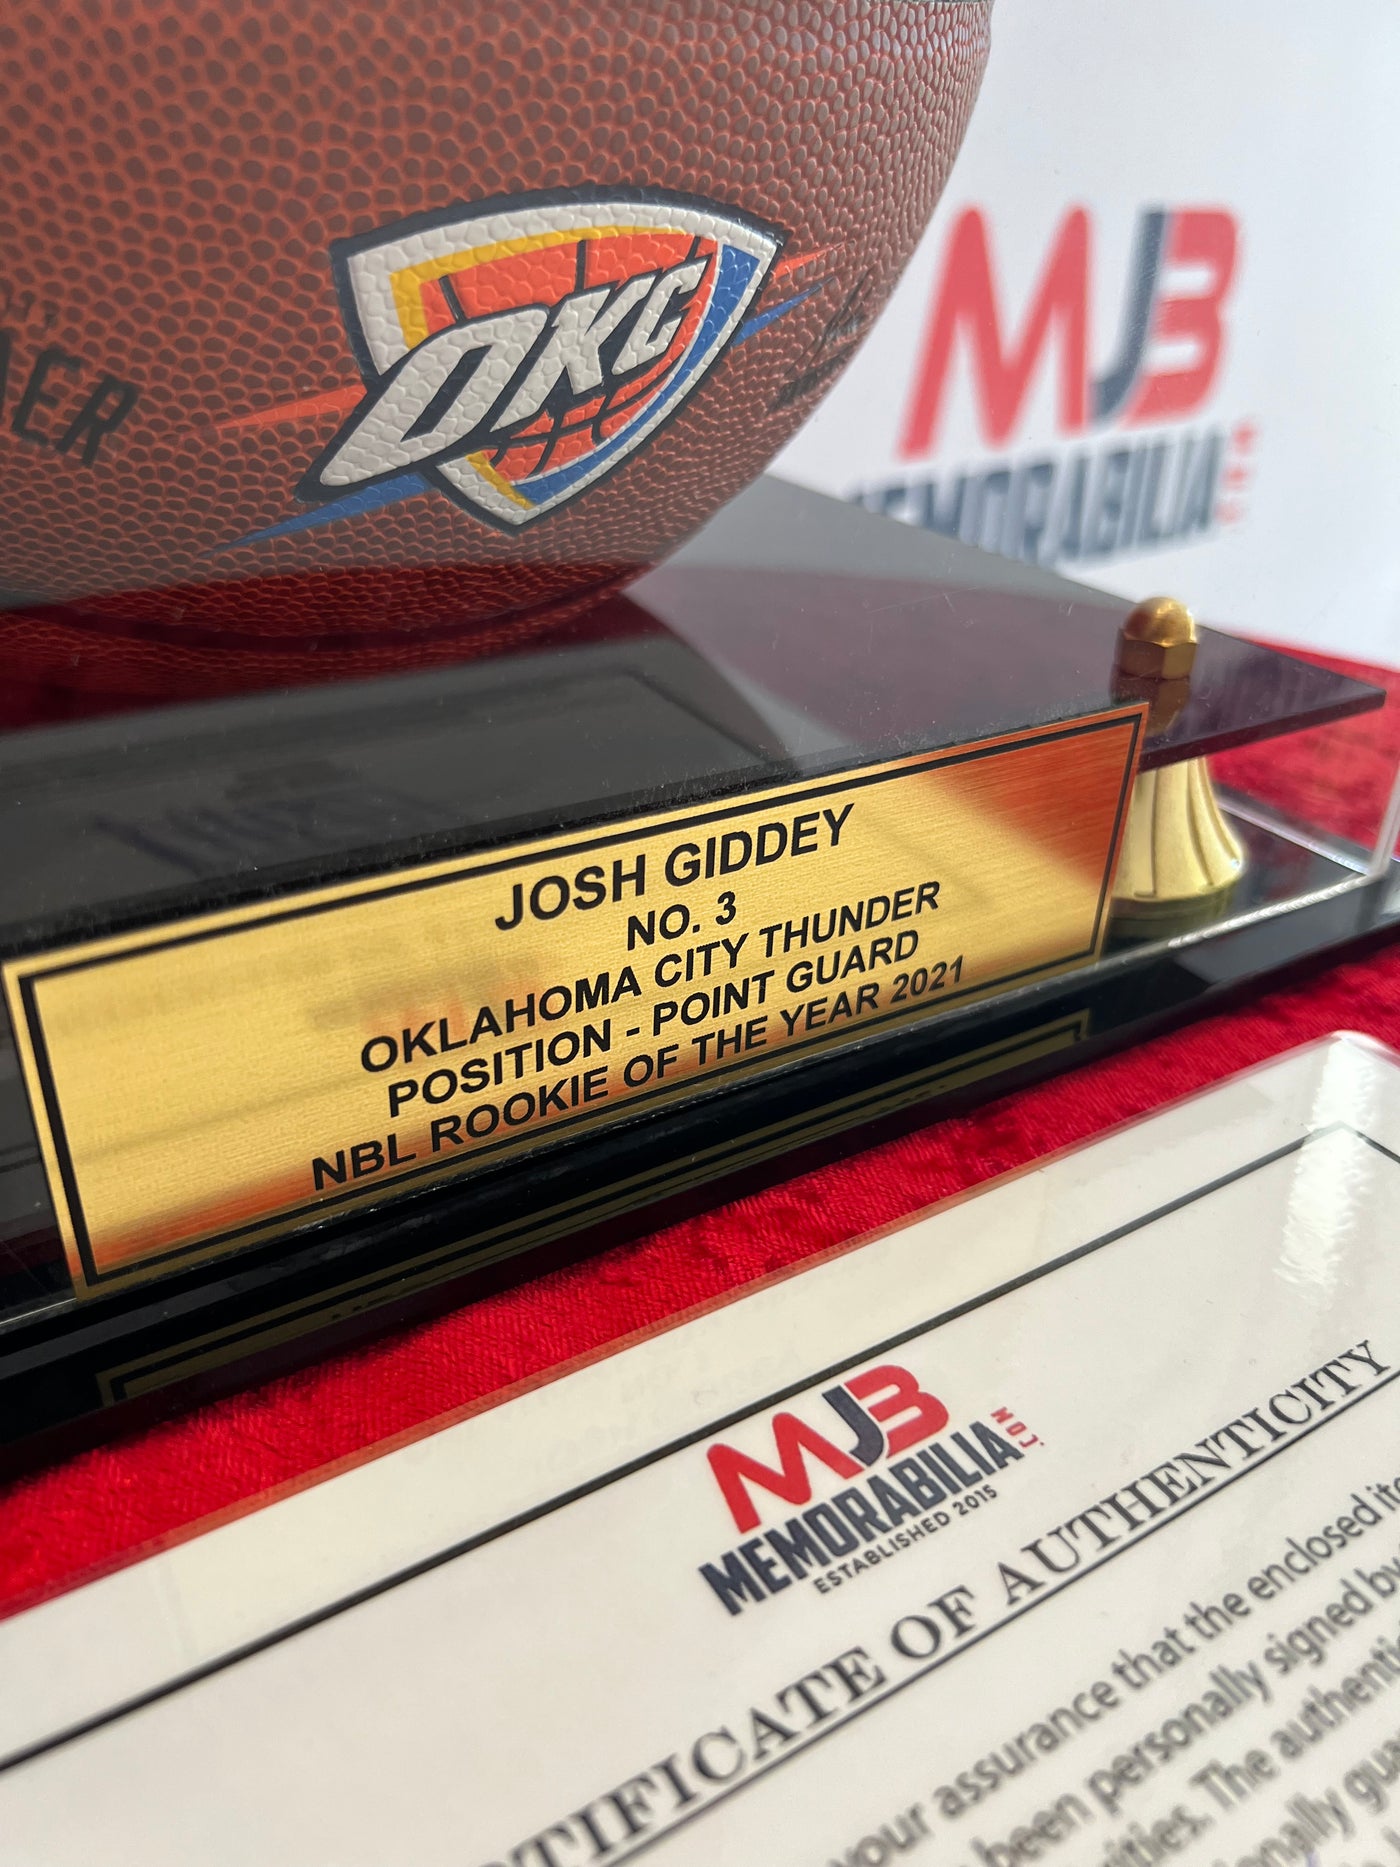 Josh Giddey Signed Basketball Exclusive  Rare Collectible in Perspex Case with Gold Plaque Career Stats and Photo Fully Authenticated